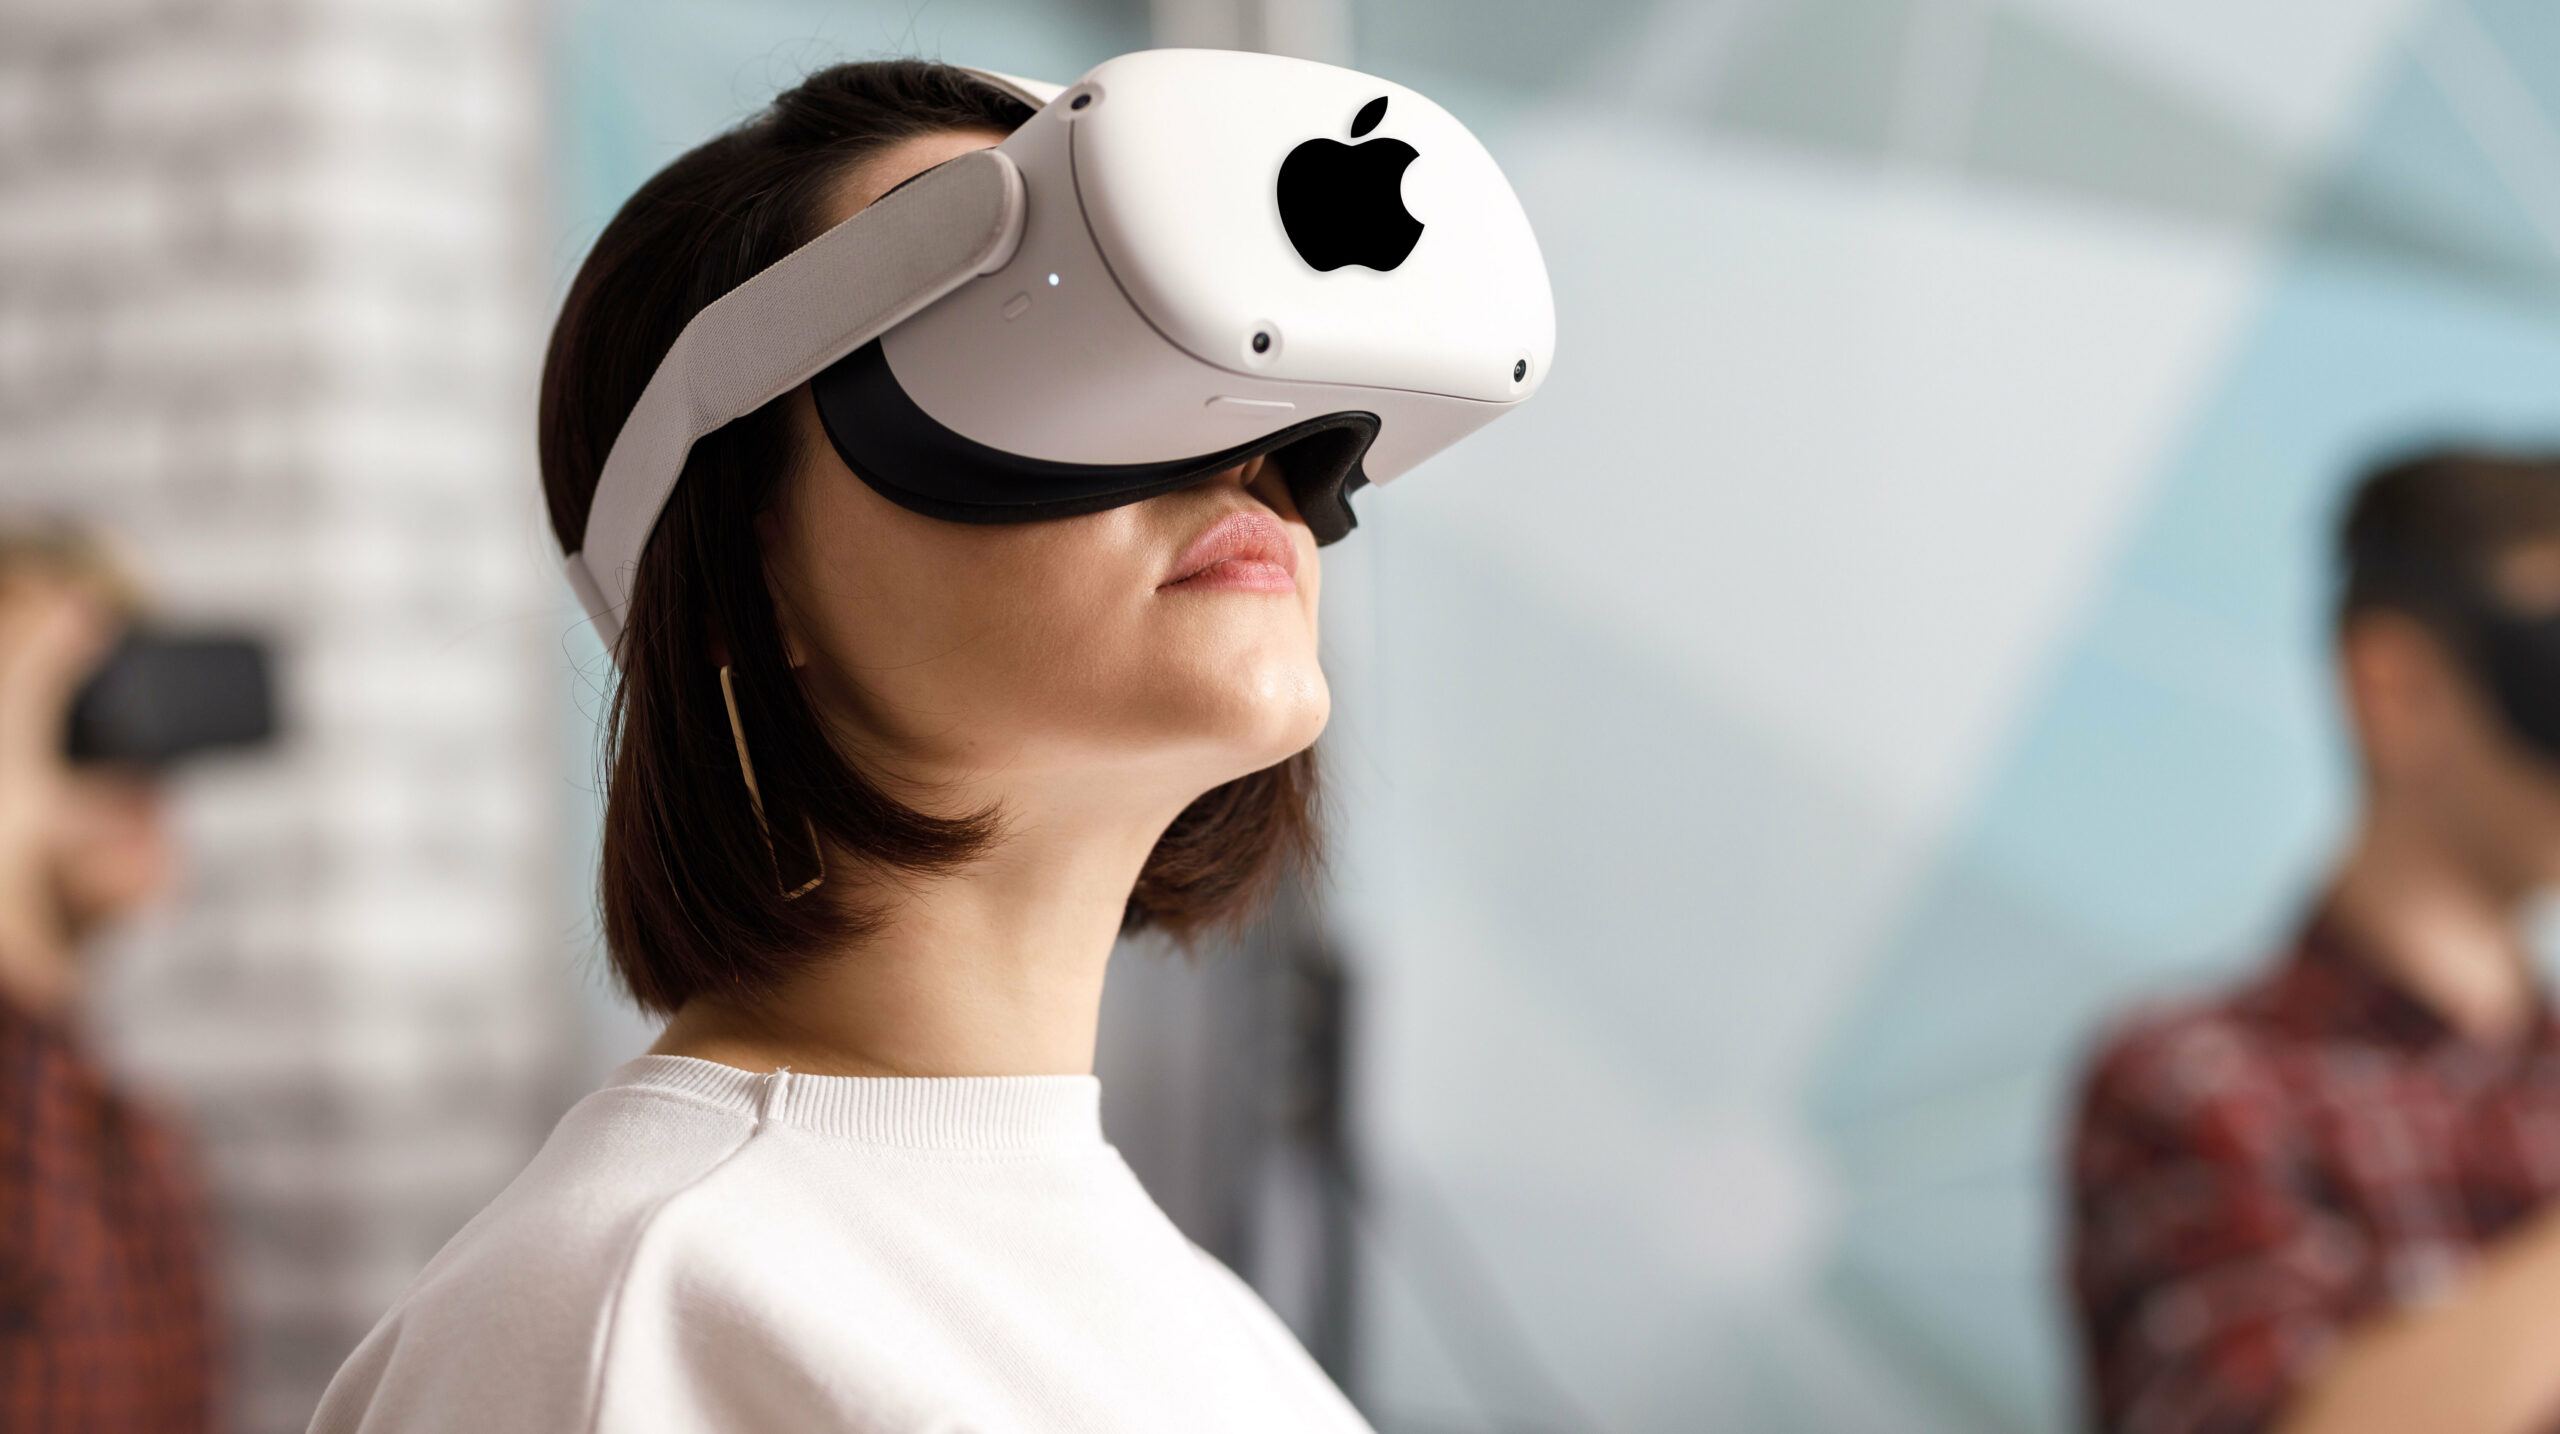 Apple S Rumoured Mixed Reality Headset Could Be Called Reality Pro Offer Ios Like Features